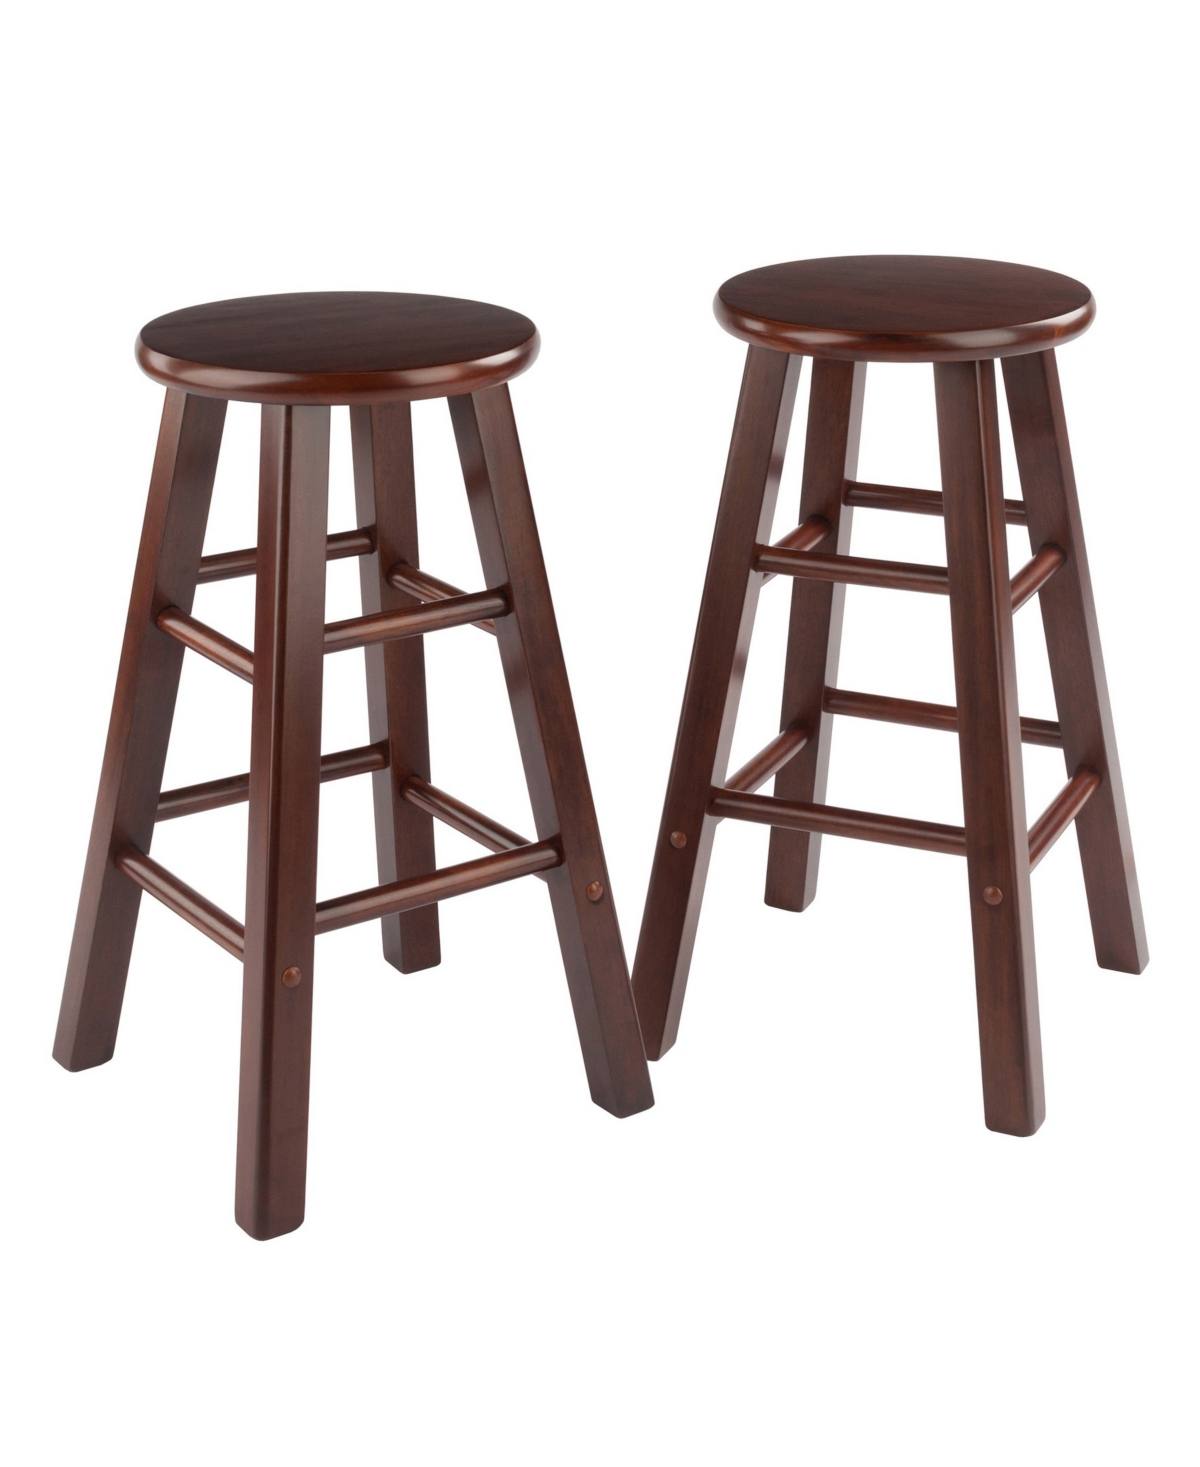 Winsome Element 2-piece Wood Counter Stool Set In Walnut